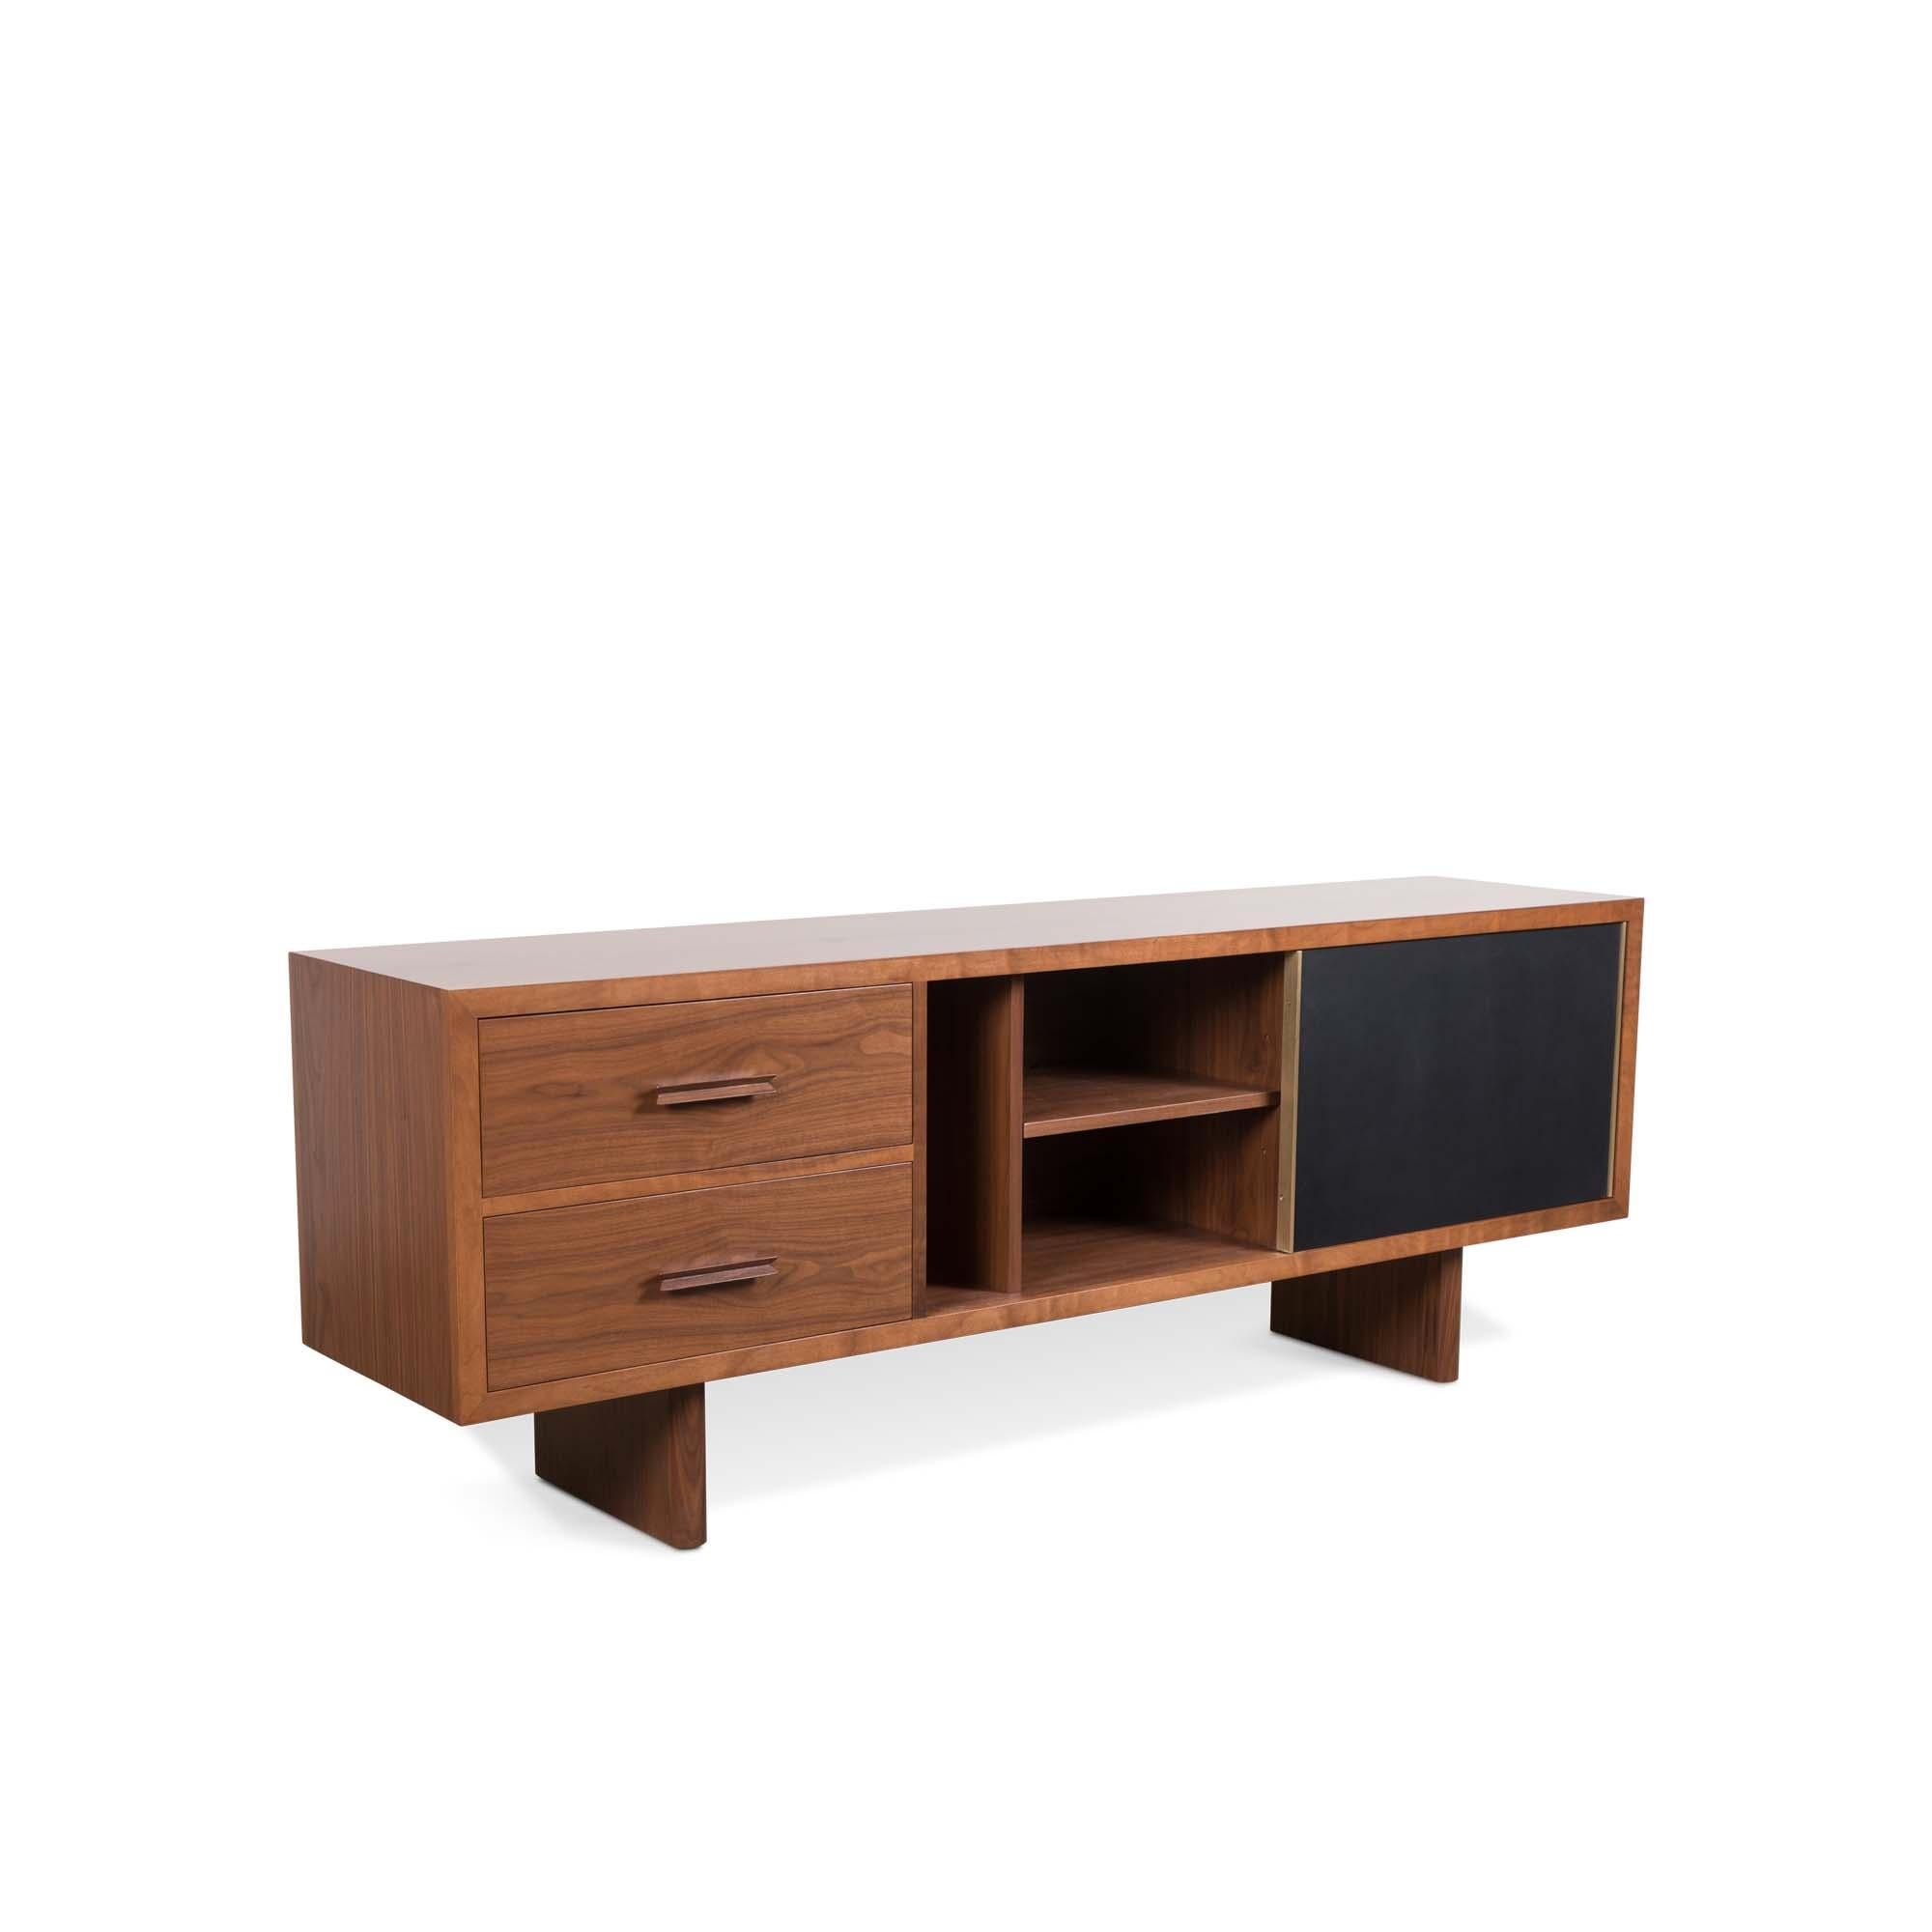 American Walnut and Leather Inverness Media Cabinet by Lawson-Fenning